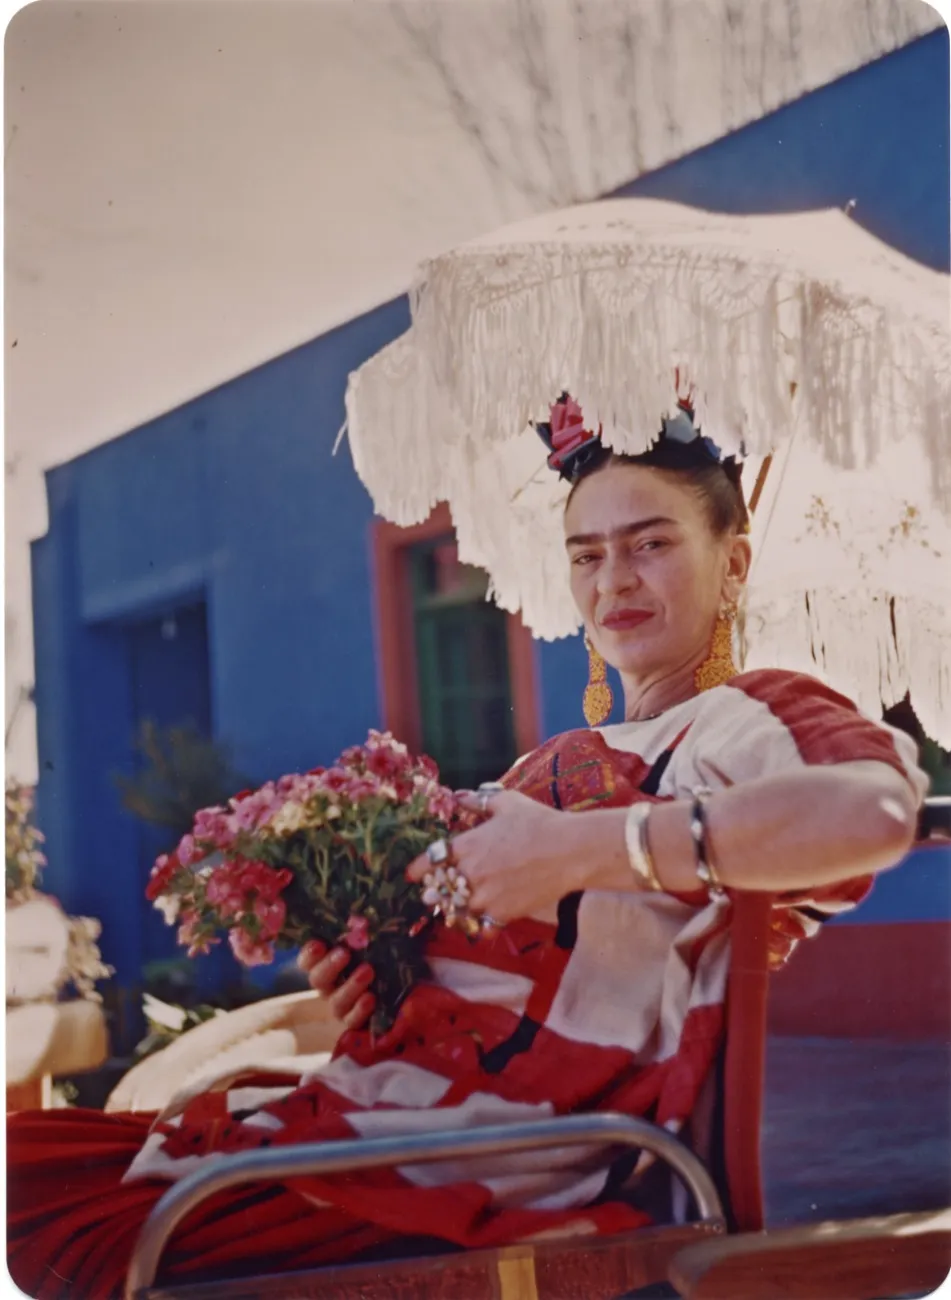 Kahlo holds a bouquet of flowers, wearing a flower crown and red-and-white dress, sitting outside underneath a white parasol in front of her bright blue house